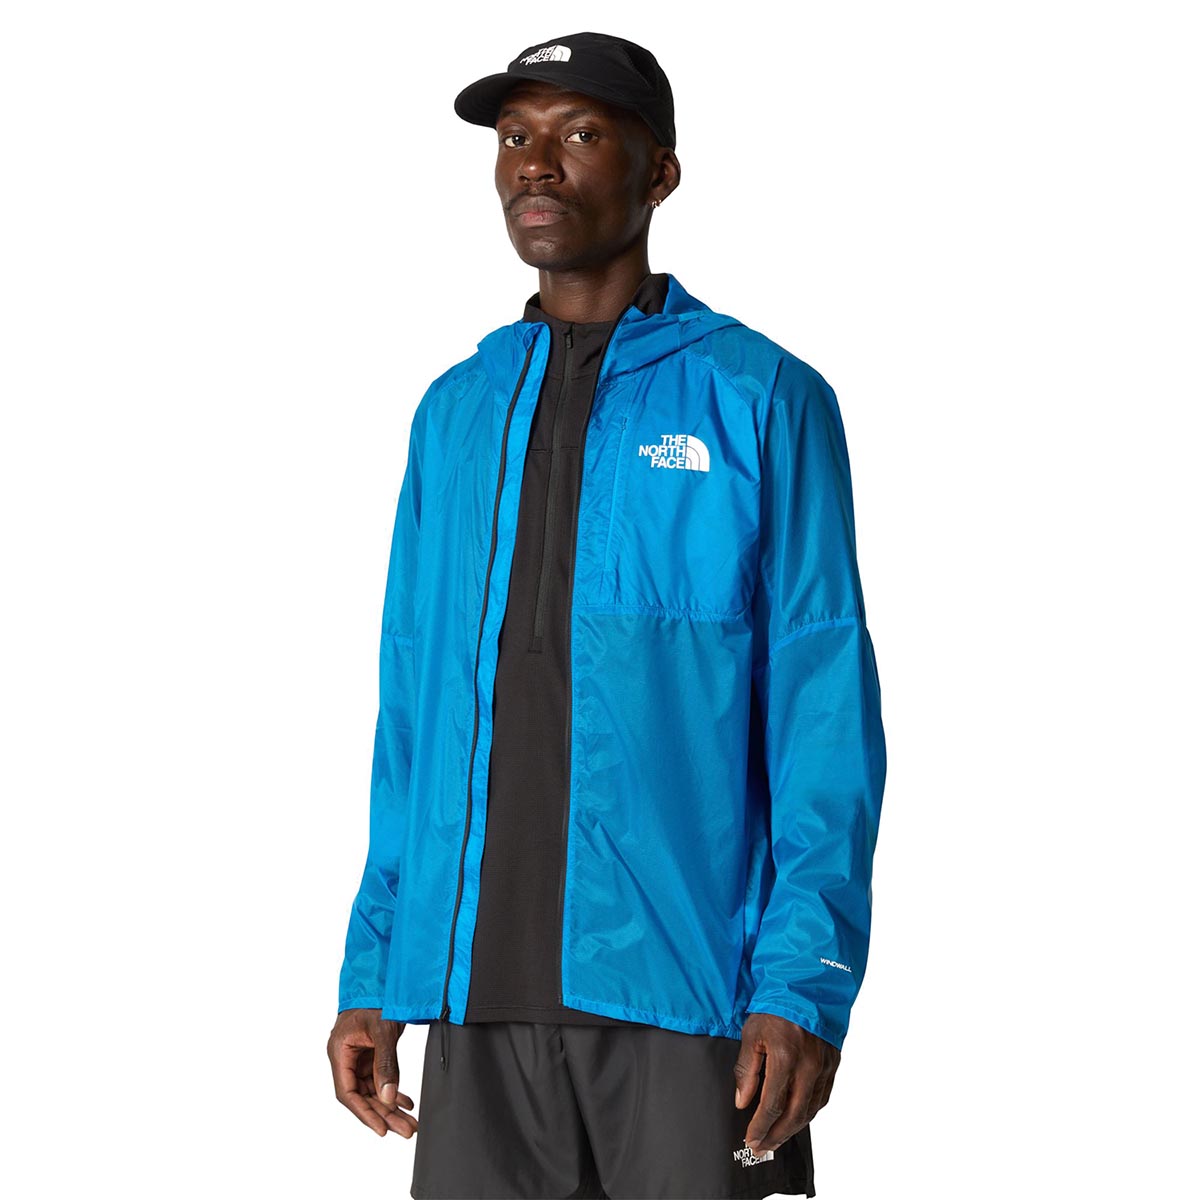 THE NORTH FACE - WINDSTREAM SHELL